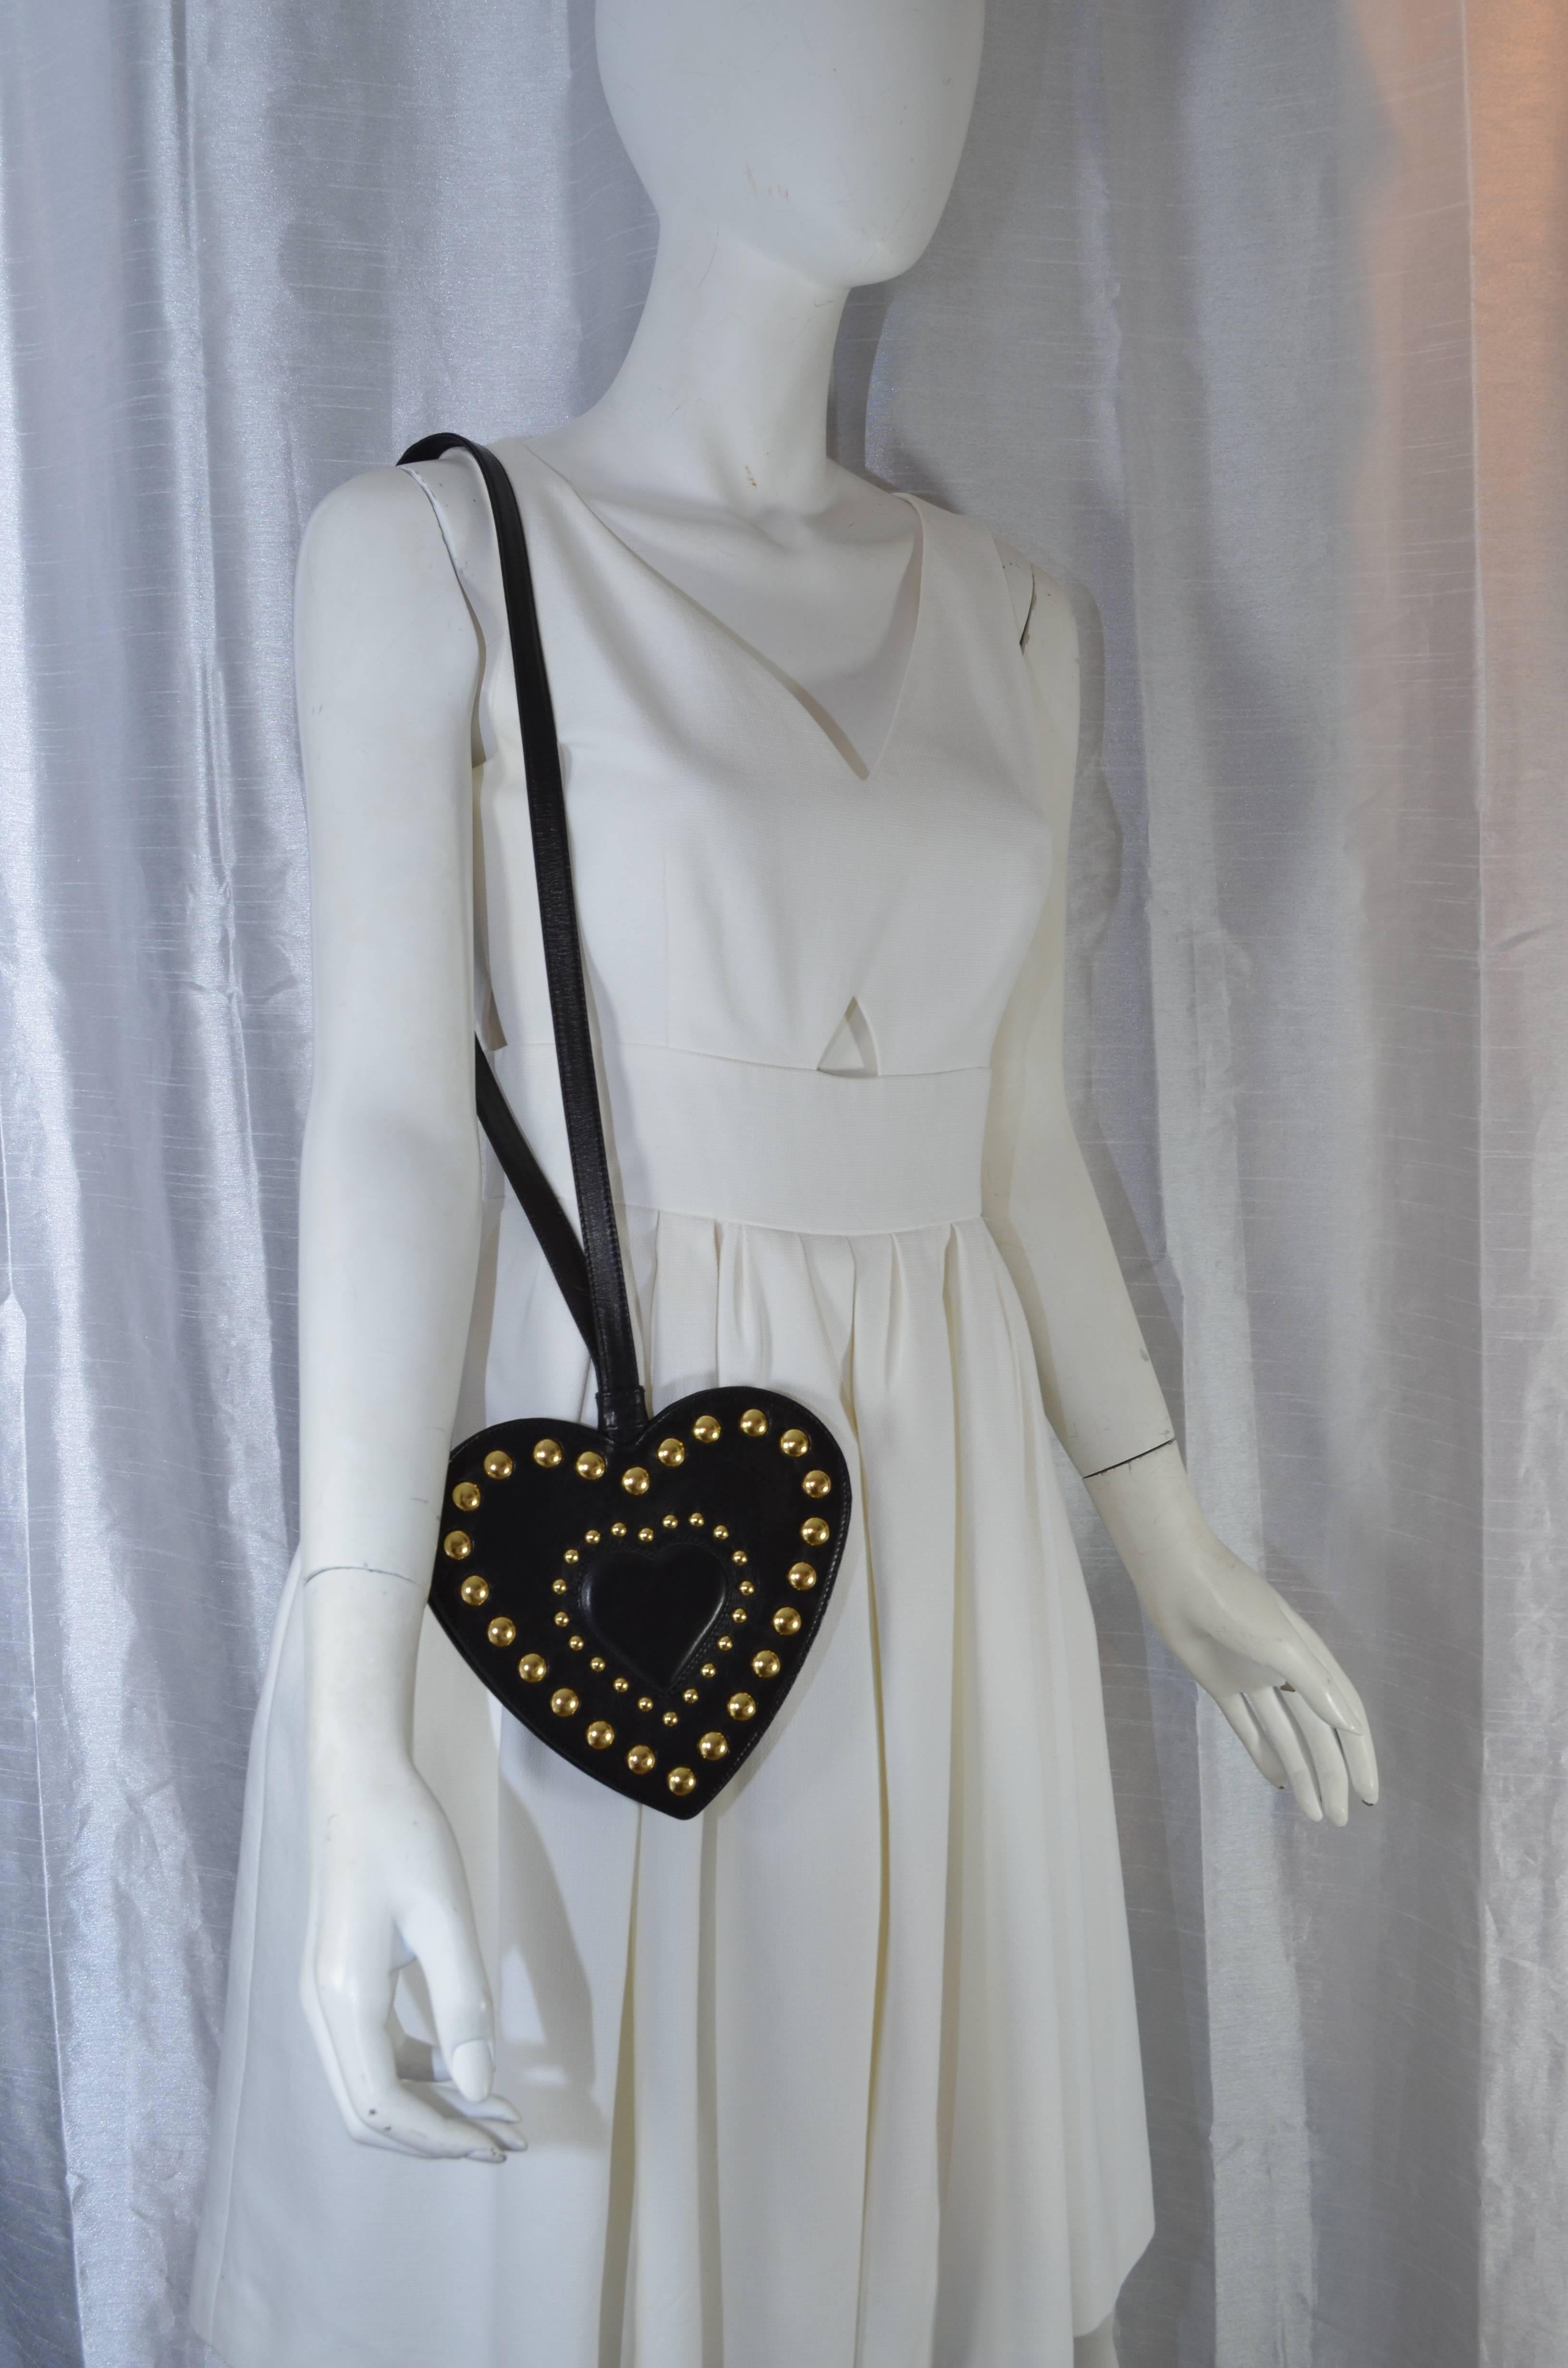 Moschino Redwall 1980's Black Leather Heart Studded Shoulder Purse

Heart shaped Moschino leather purse in black featuring gold metal accent studs. Back portion of bag is plain black. Magnetic button closure on the inside of the bag. Lightweight